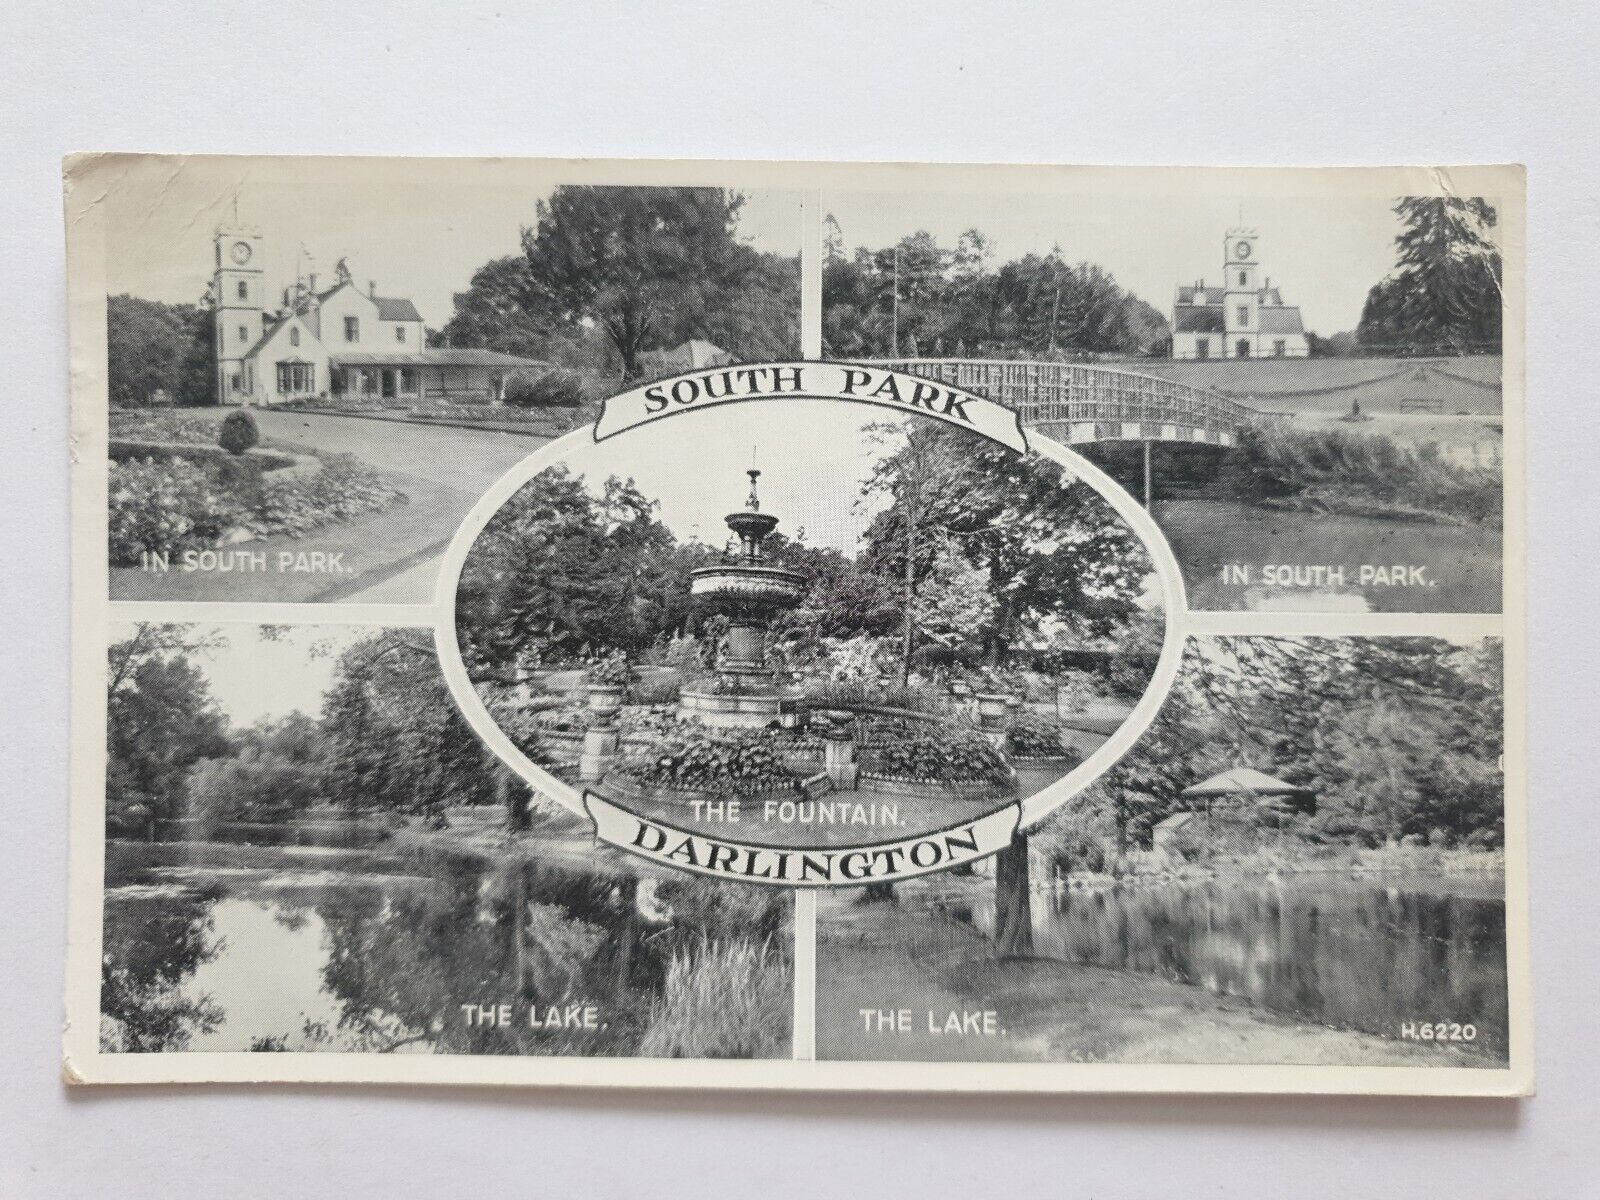 House Clearance - South Park, Darlington, Old Multiview Service 1950s